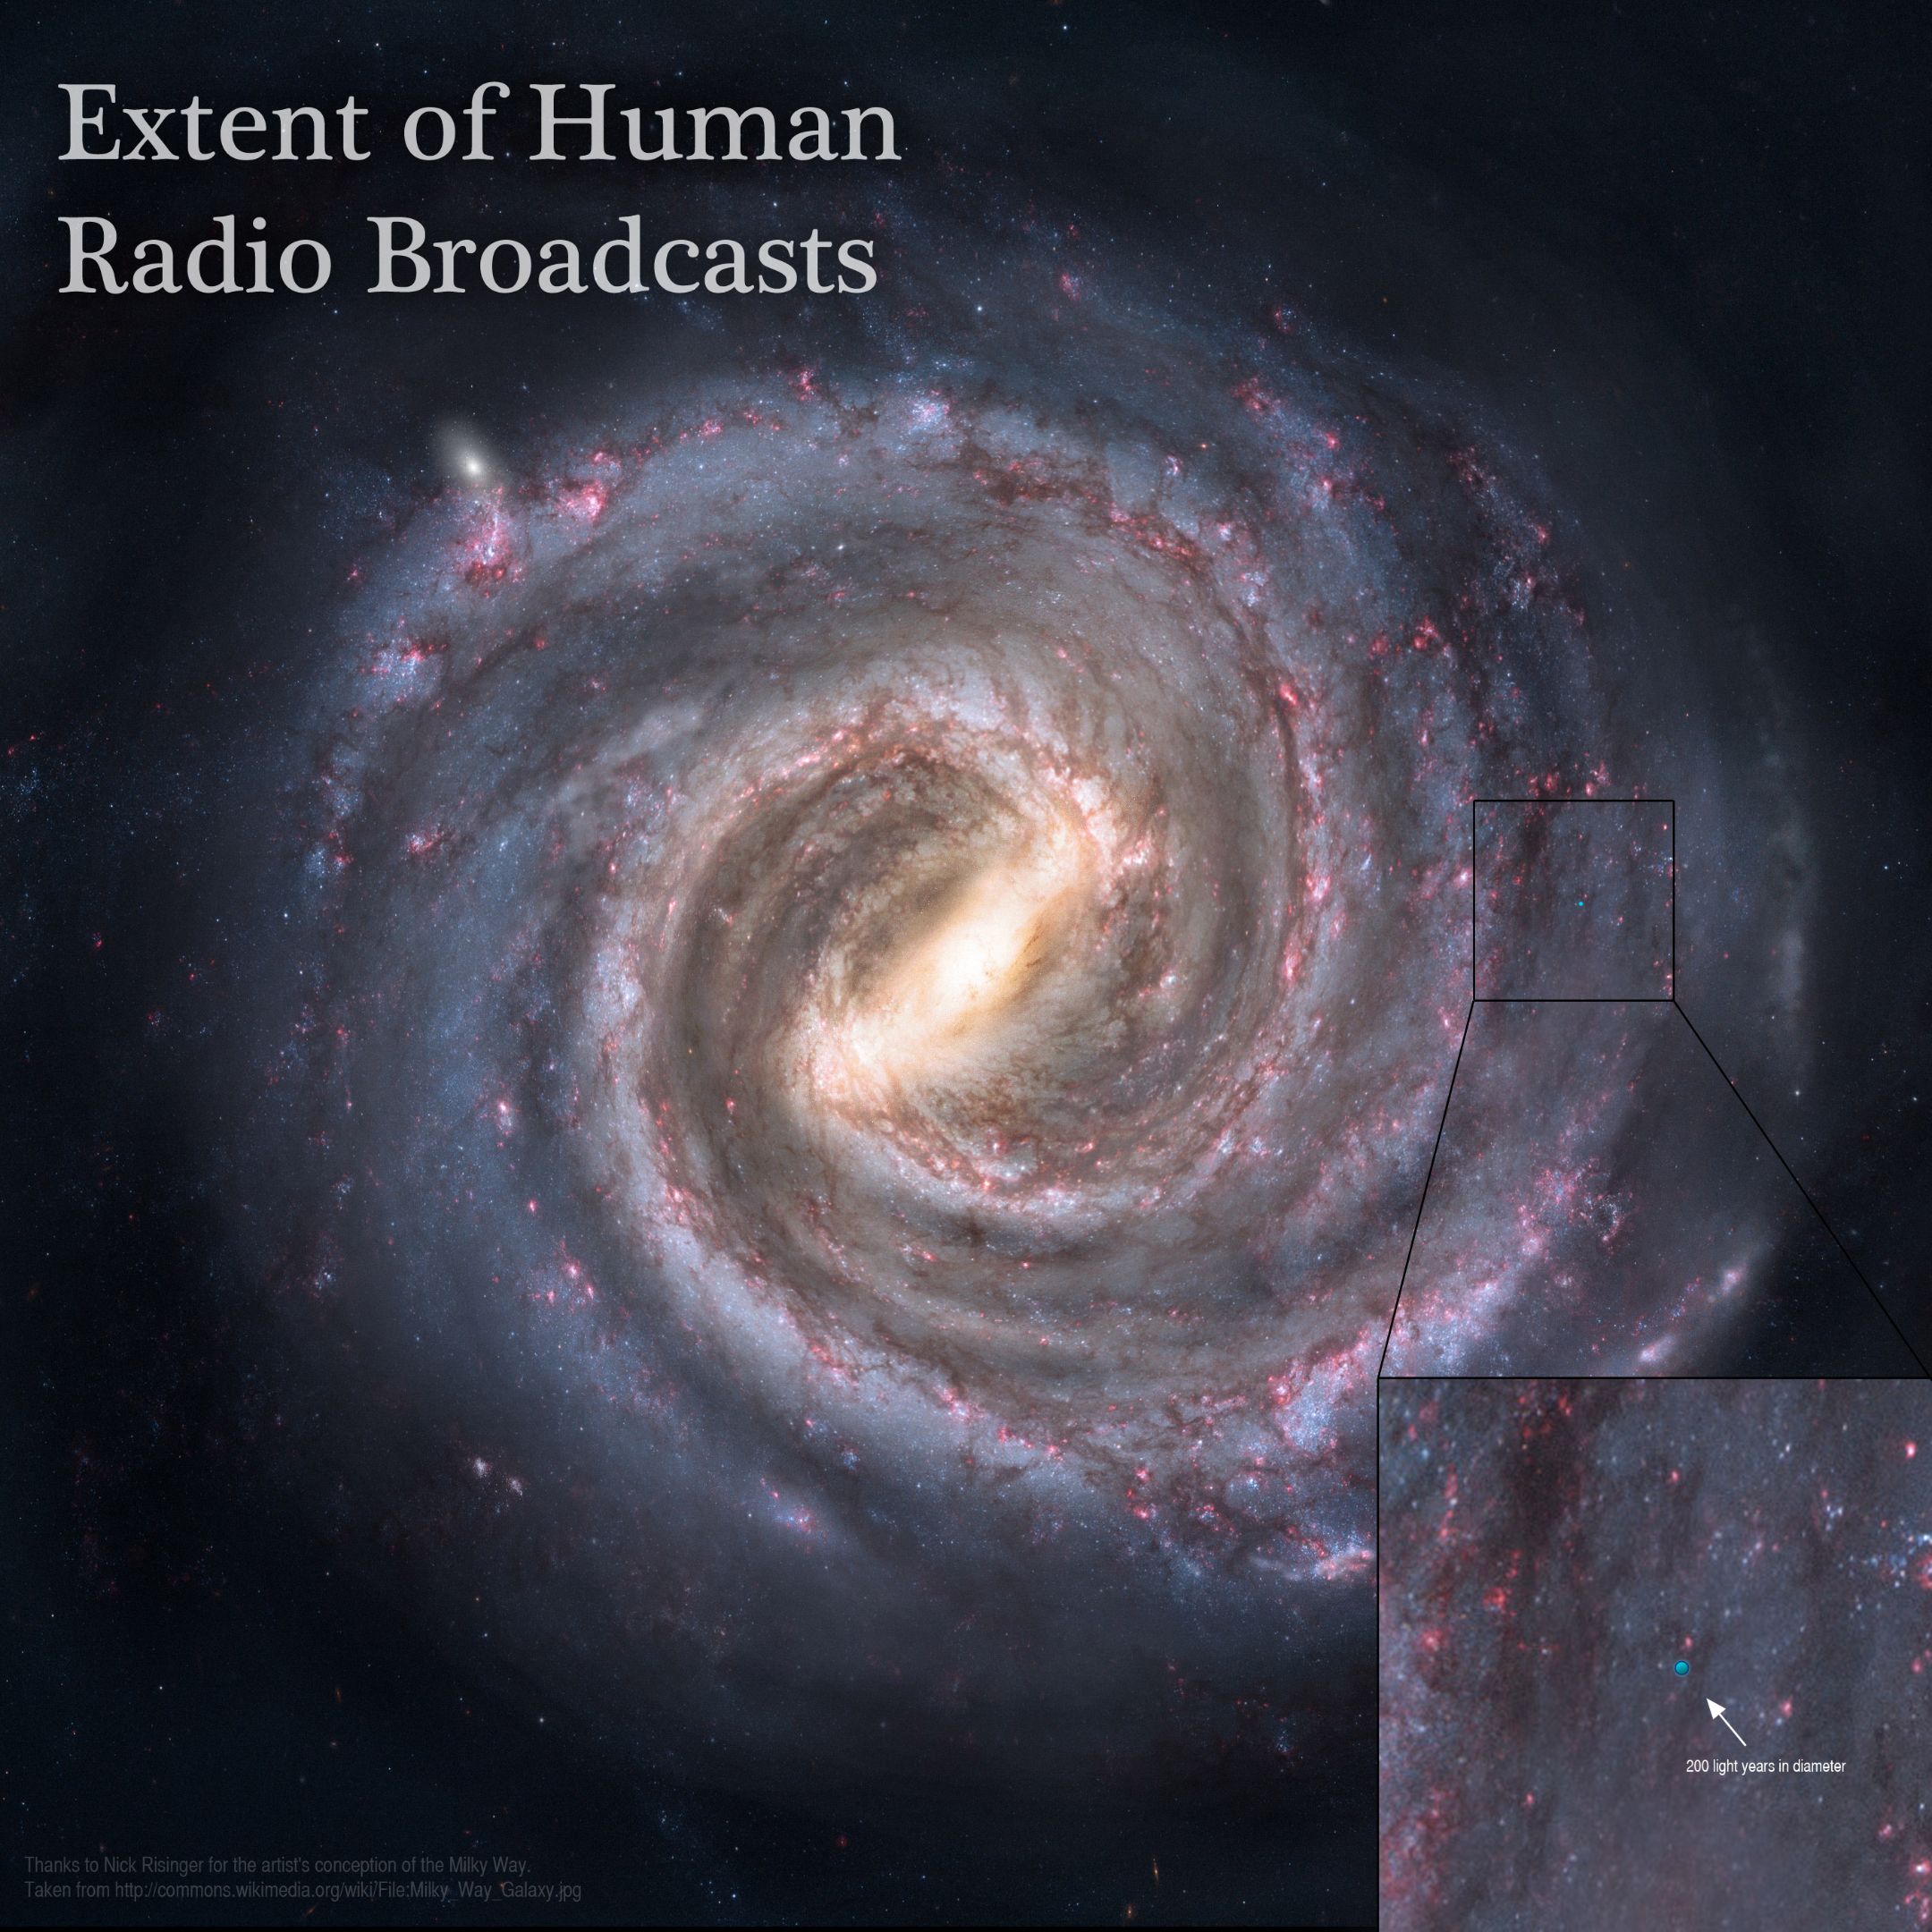 An image of our galaxy and a pinpoint to how far our broadcast signal has travelled within it.